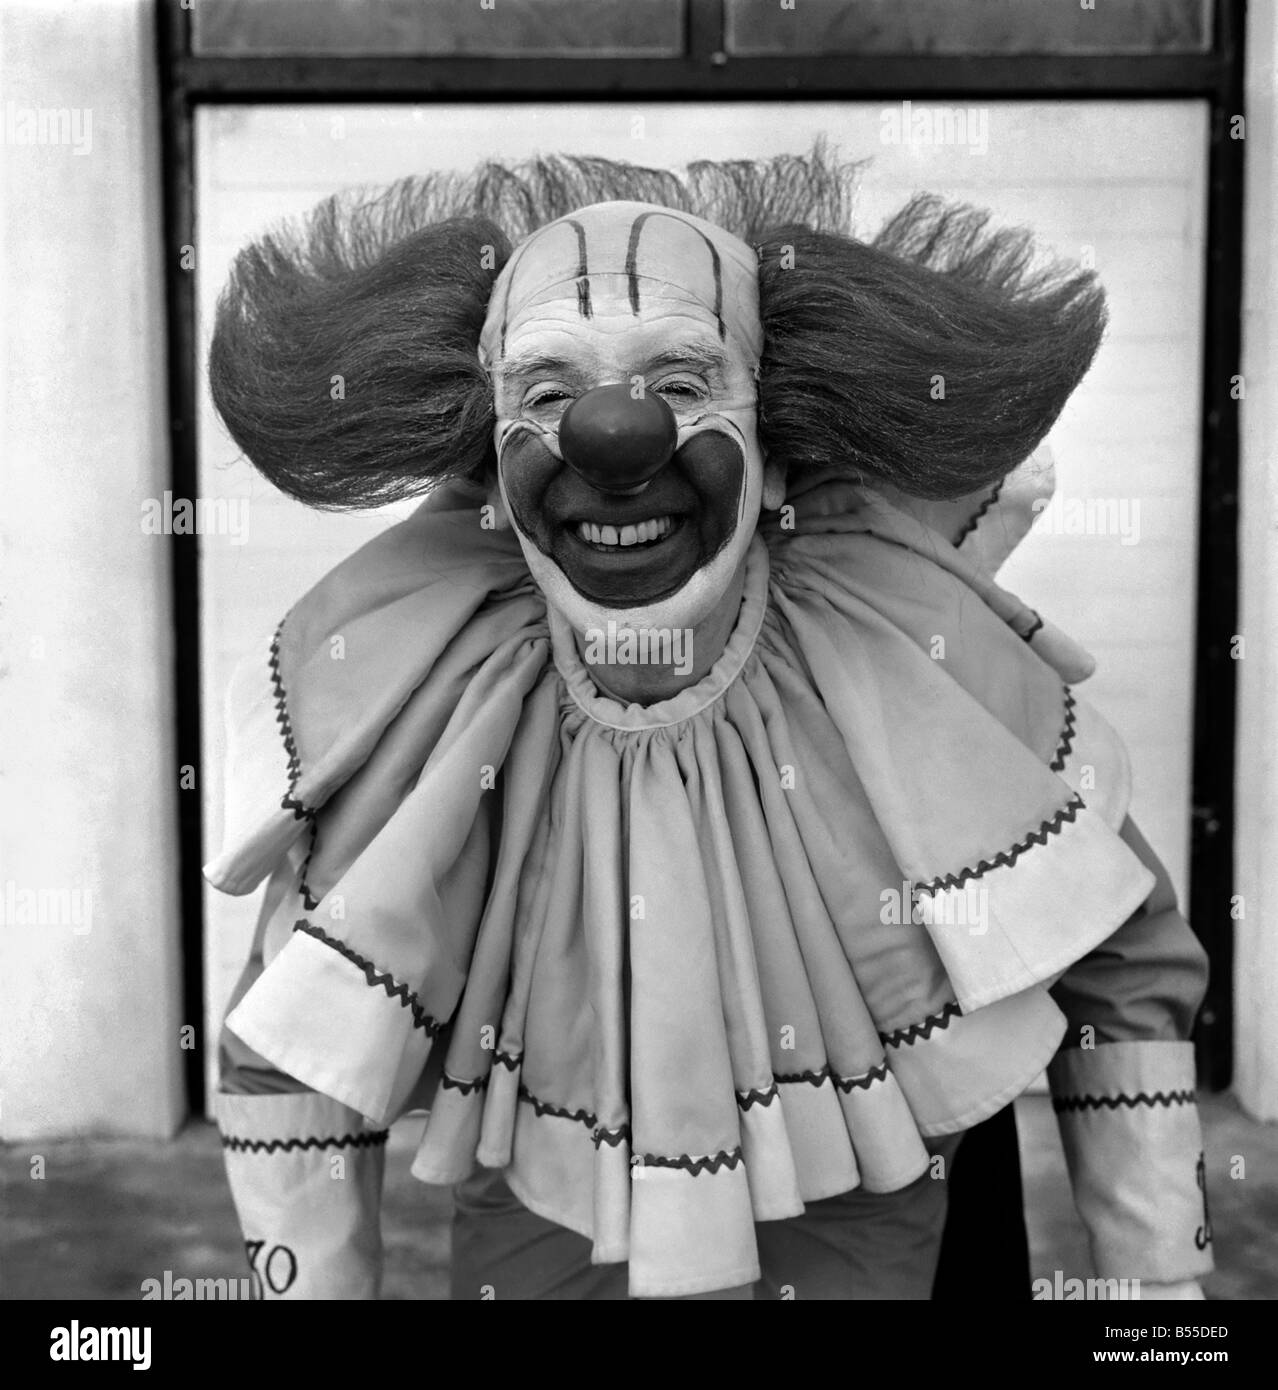 Max King as Bozo the clown as shown on American television. December 1969 Z12545 Stock Photo